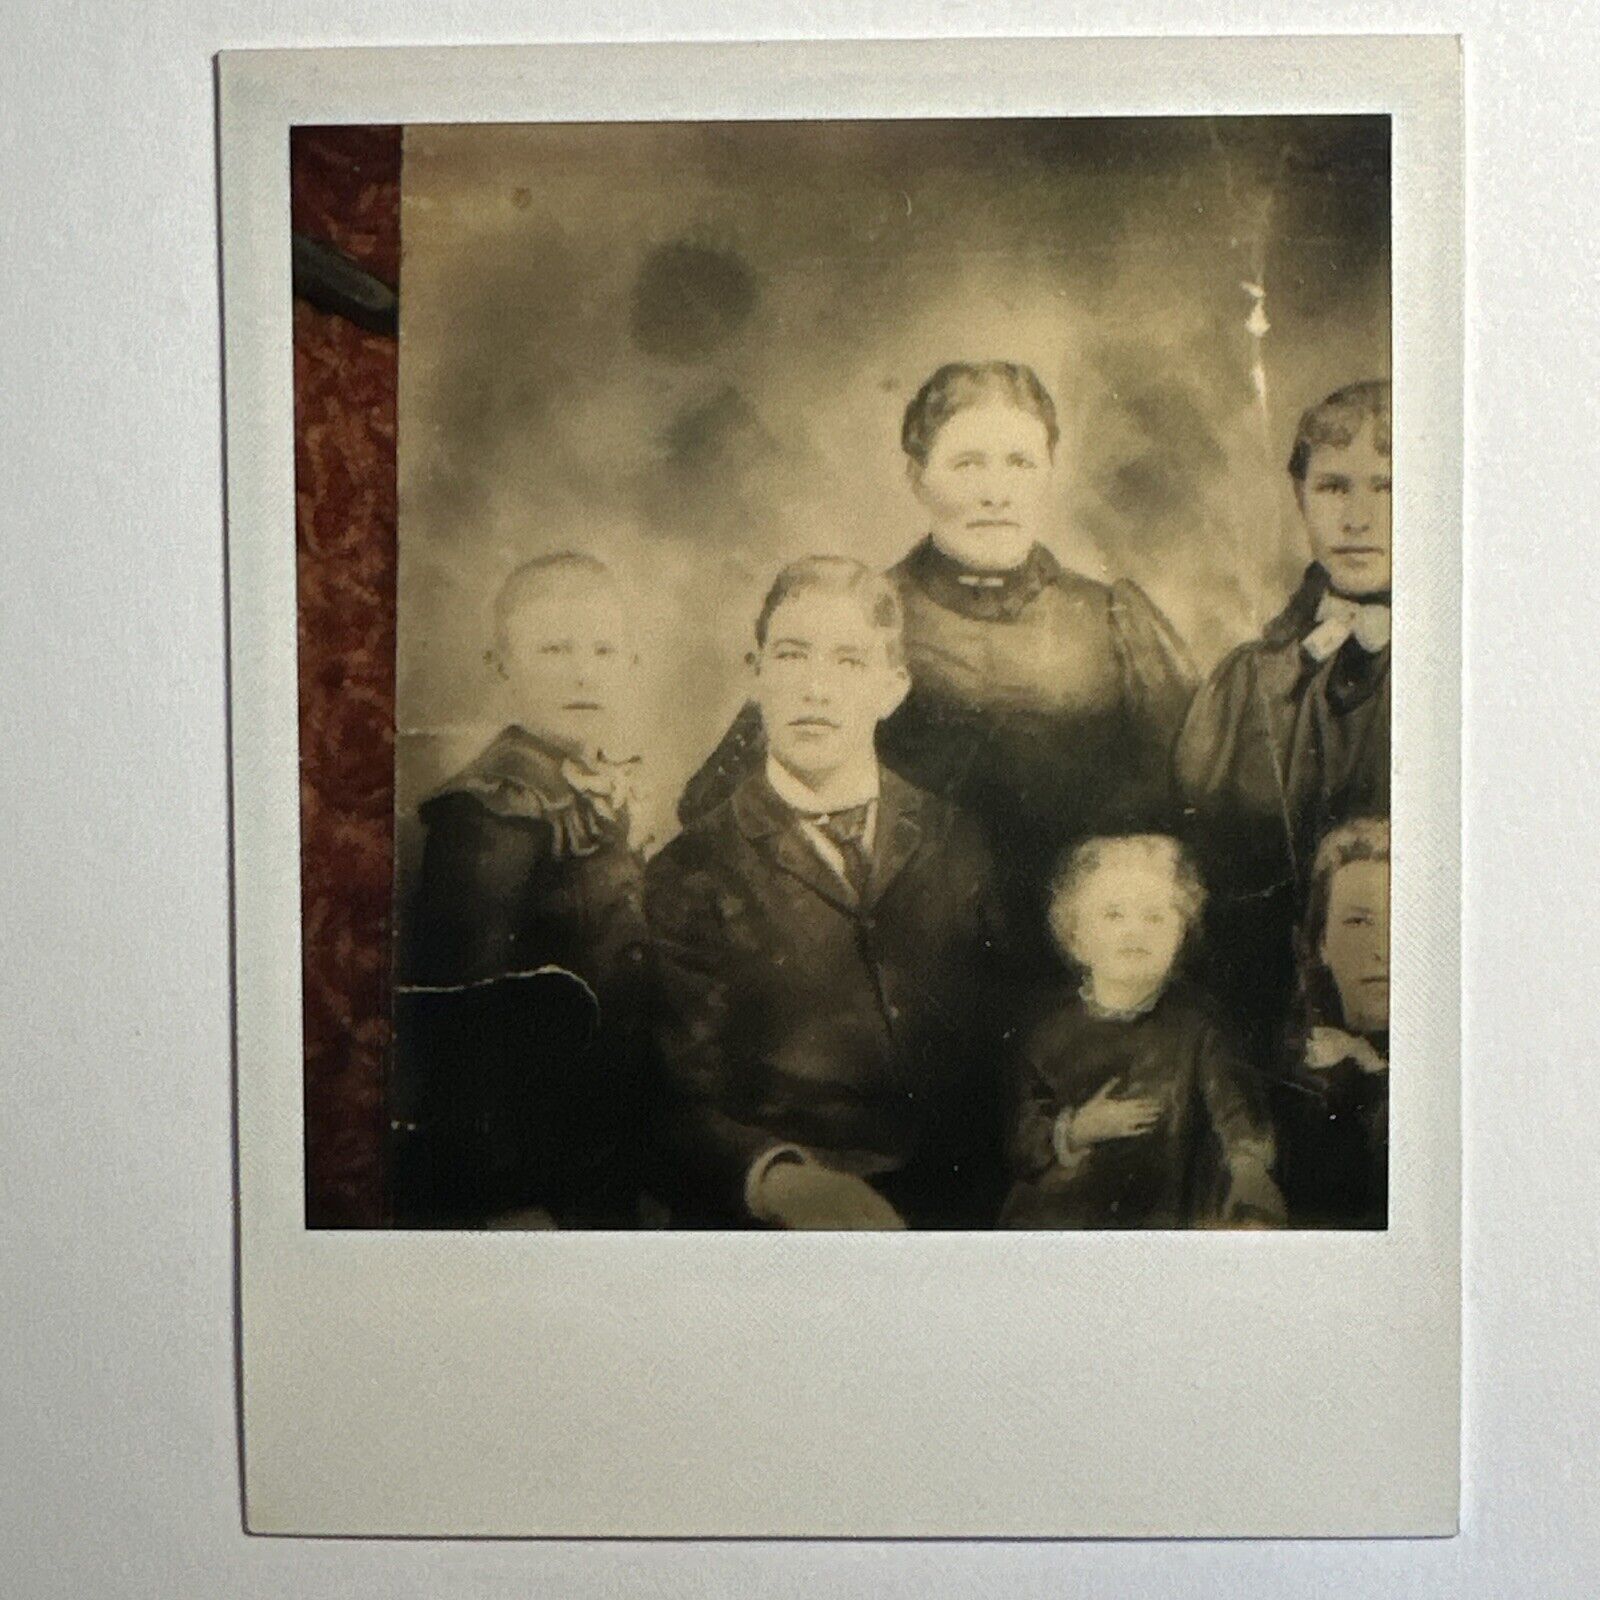 VINTAGE POLAROID PHOTO Creepy Ghostly Picture Of A Picture, Haunted, Spooky Odd